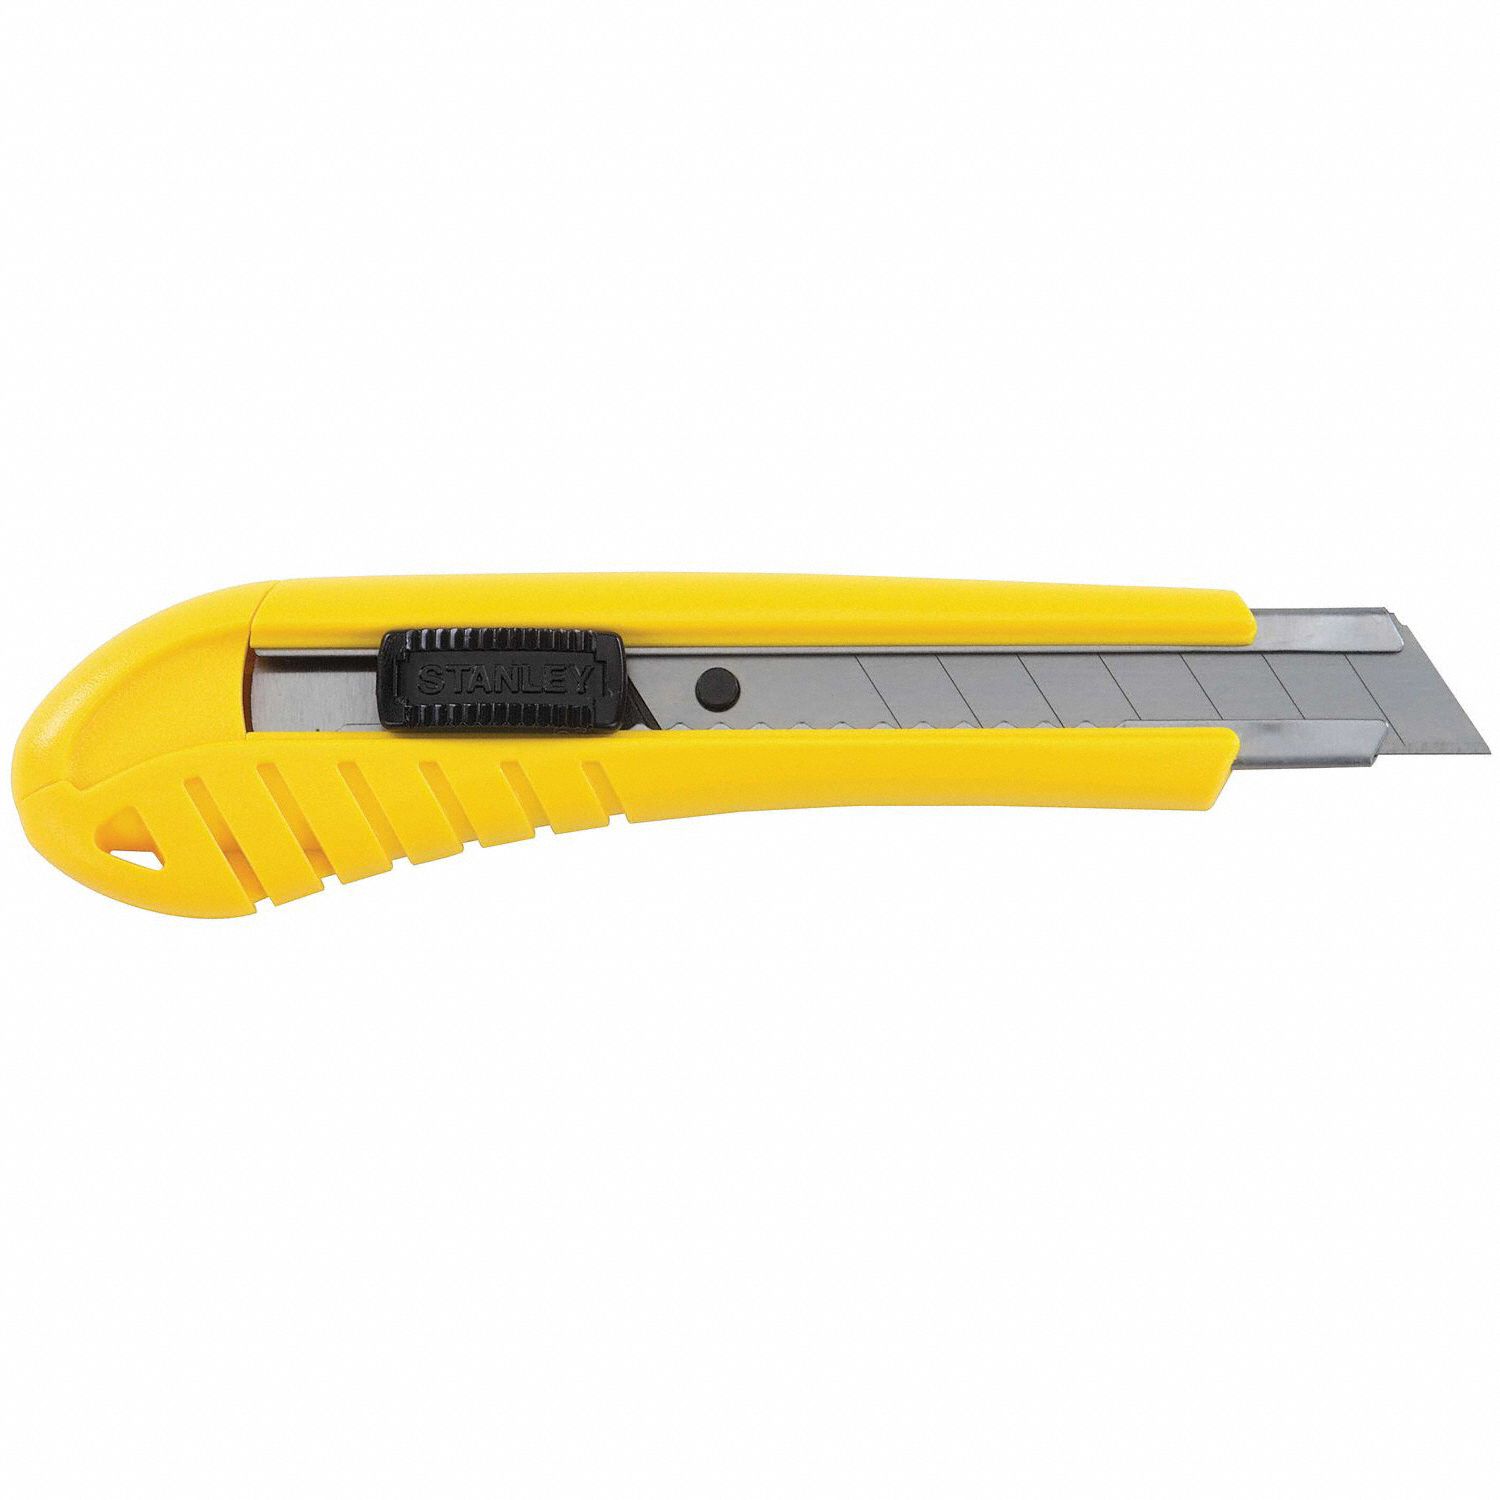 STANLEY Snap-Off Utility Knife: 7 in Overall Lg, Textured, 8 Segments, 0  Blades Stored, Yellow